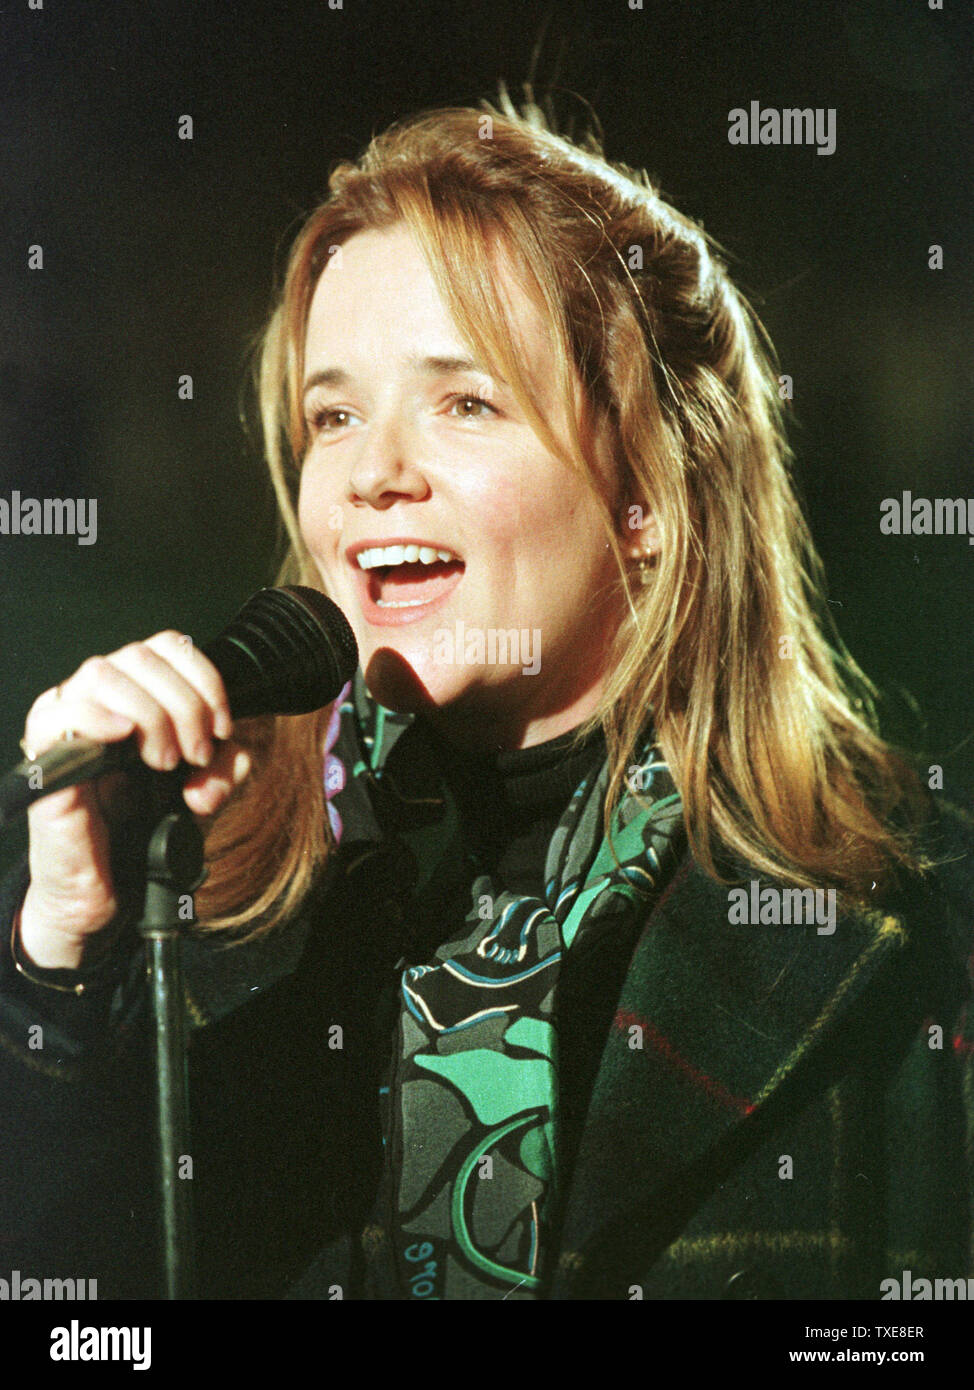 SLP2000011604 - 16 JANUARY 2000 - ST. LOUIS, MISSOURI, USA: Actress Lea Thompson sings her rendition of the National Anthem prior to the Divisional Playoff game between the St. Louis Rams and the Minnesota Vikings in St. Louis at the Trans World Dome, January 16. rg/bg/Bill Greenblatt  UPI Stock Photo